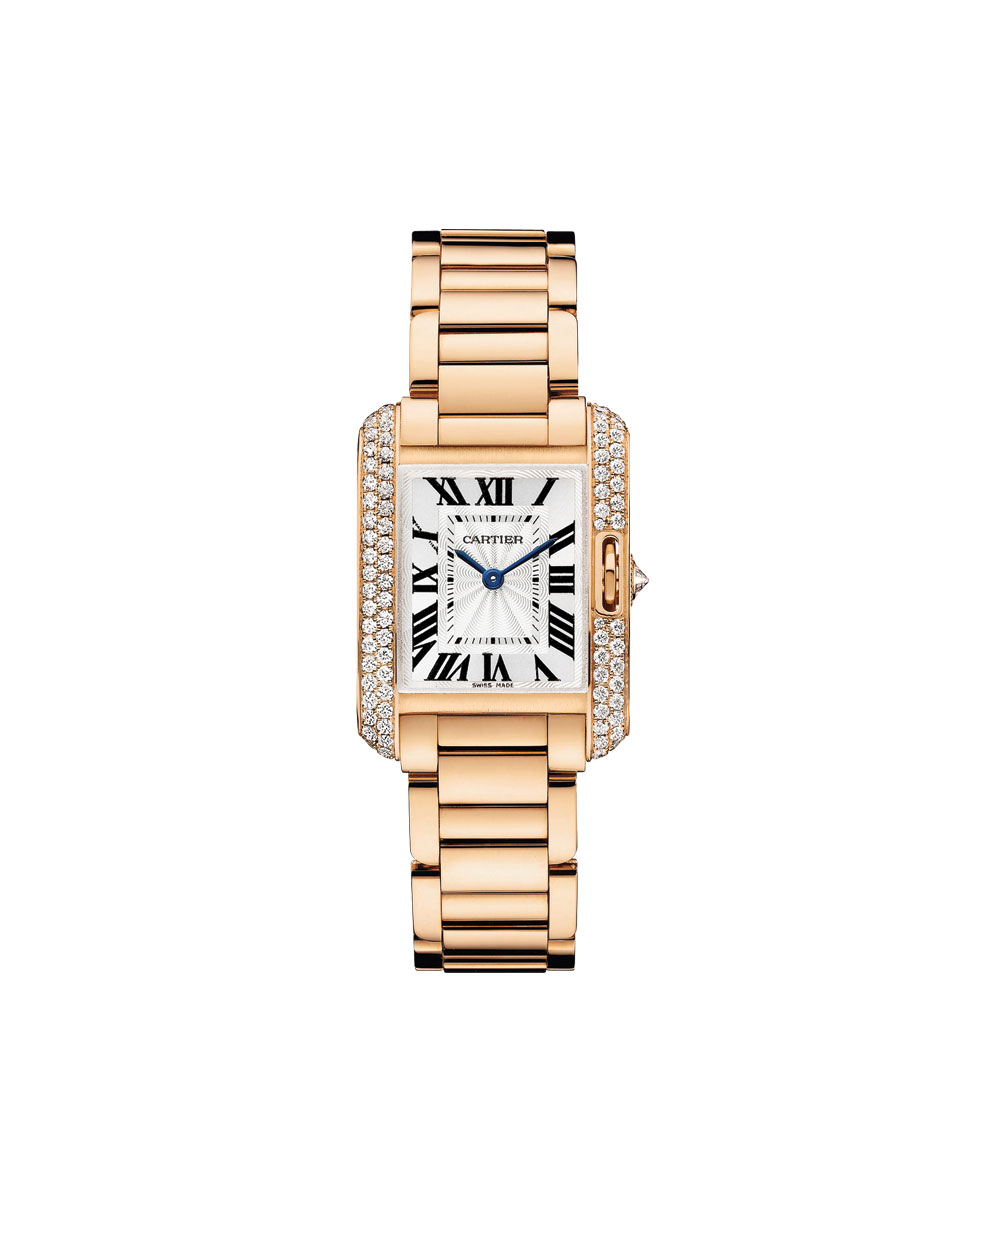 Cartier watch, $58,000, from Partridge Jewellers